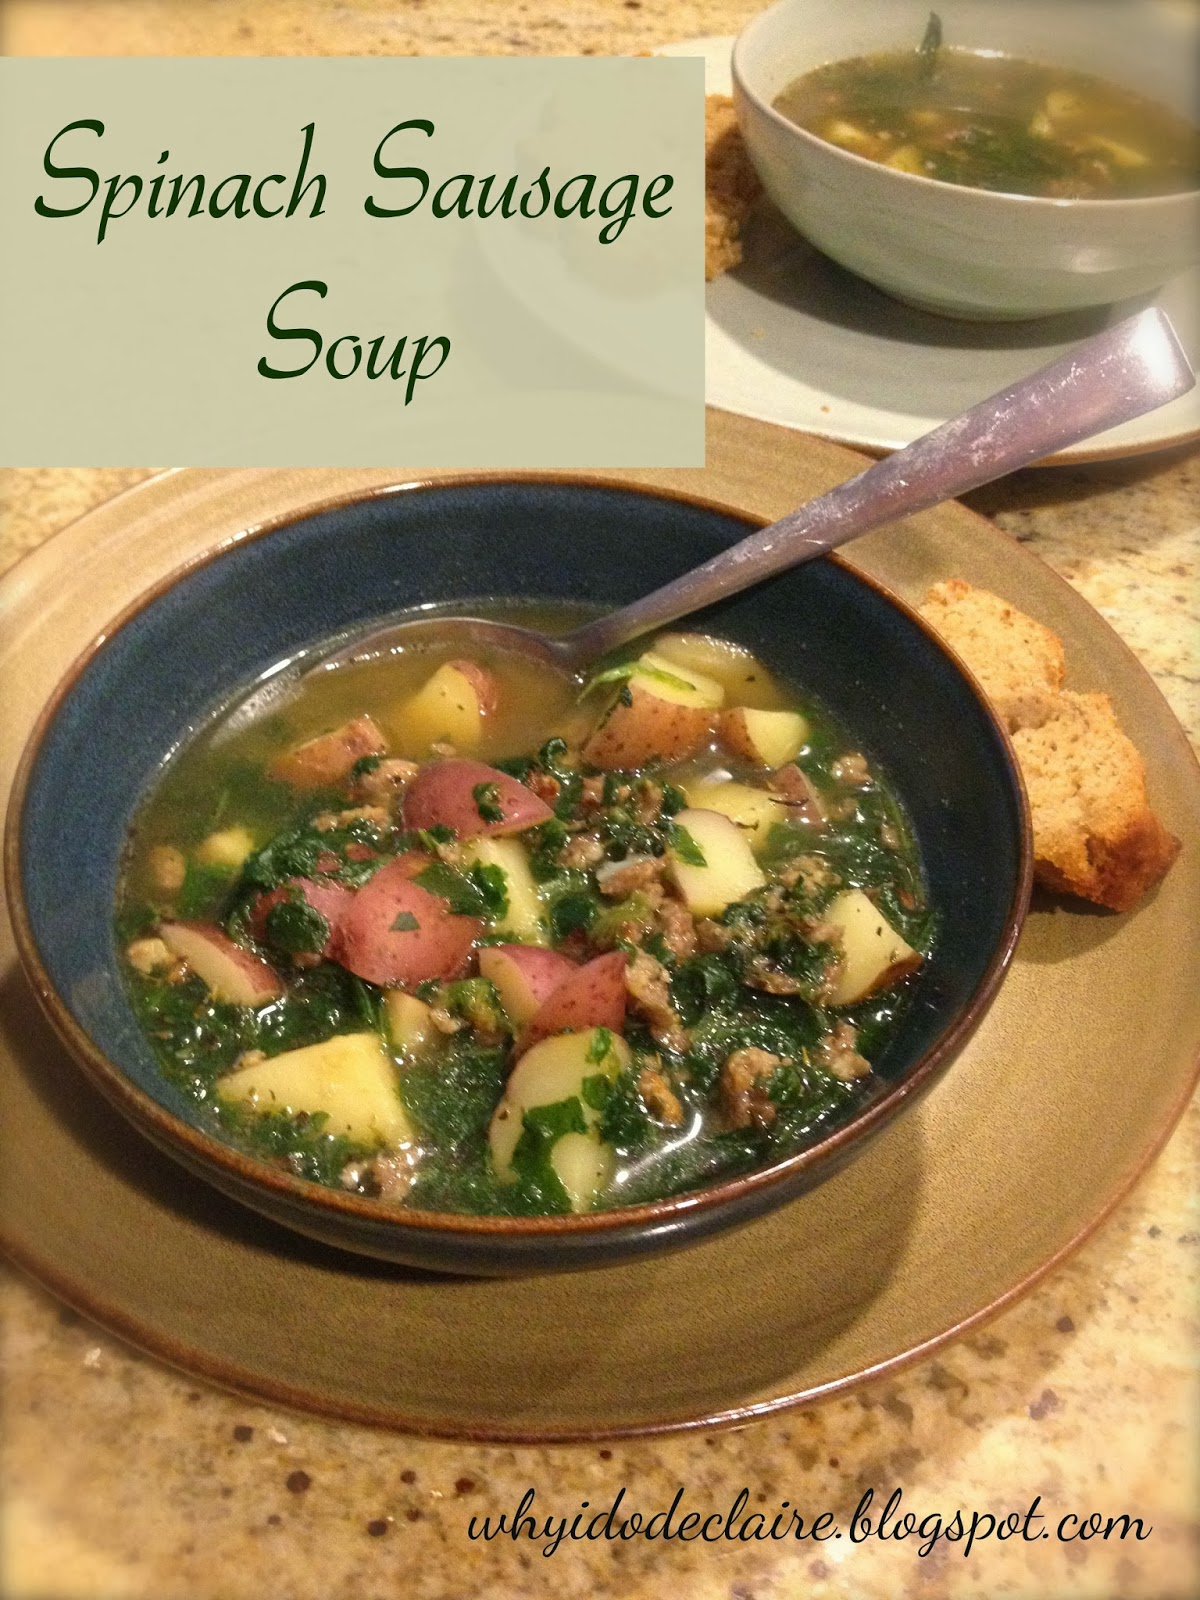 I do deClaire: Spinach Sausage Soup (5 ingredients!)